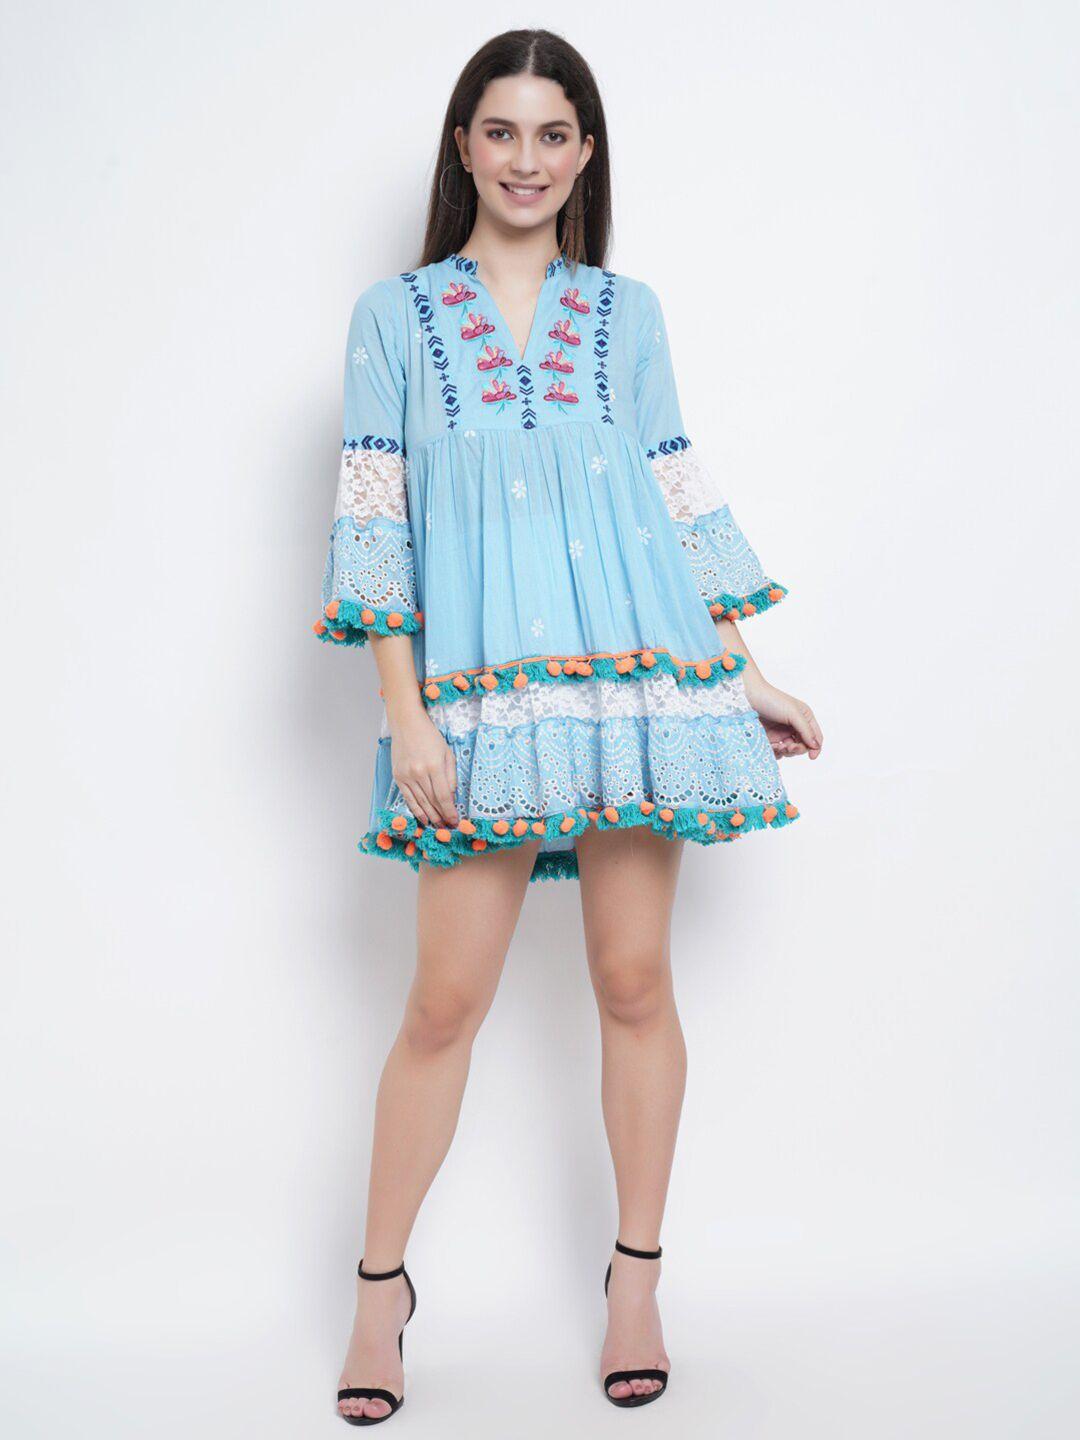 ix-impression-turquoise-blue-&-white-floral-embroidered-dress